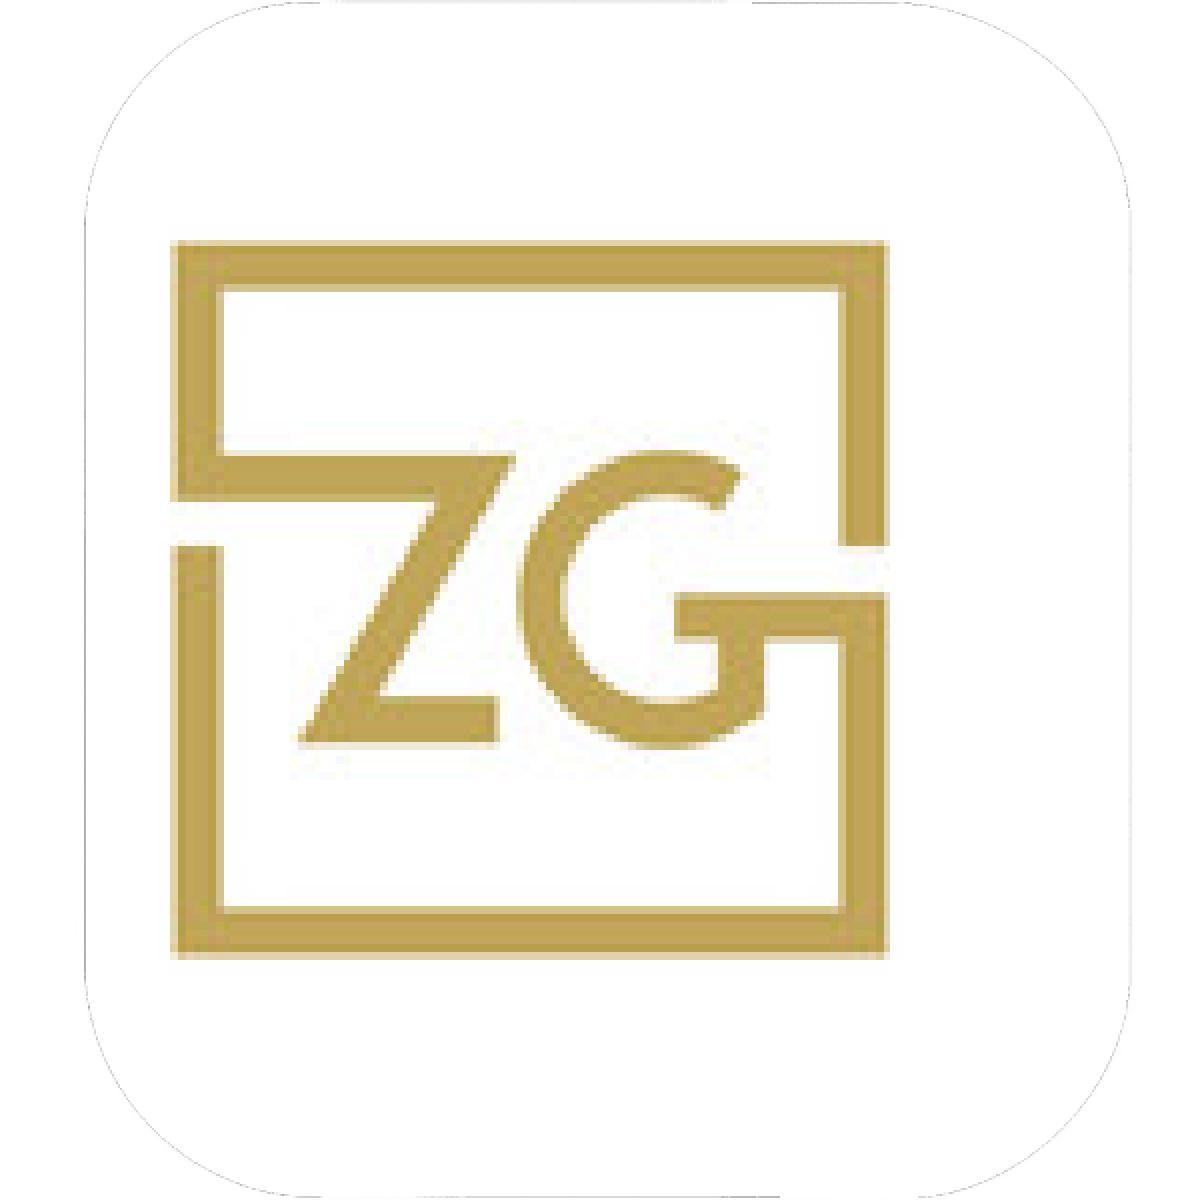 With Two Zz Logo - Designs